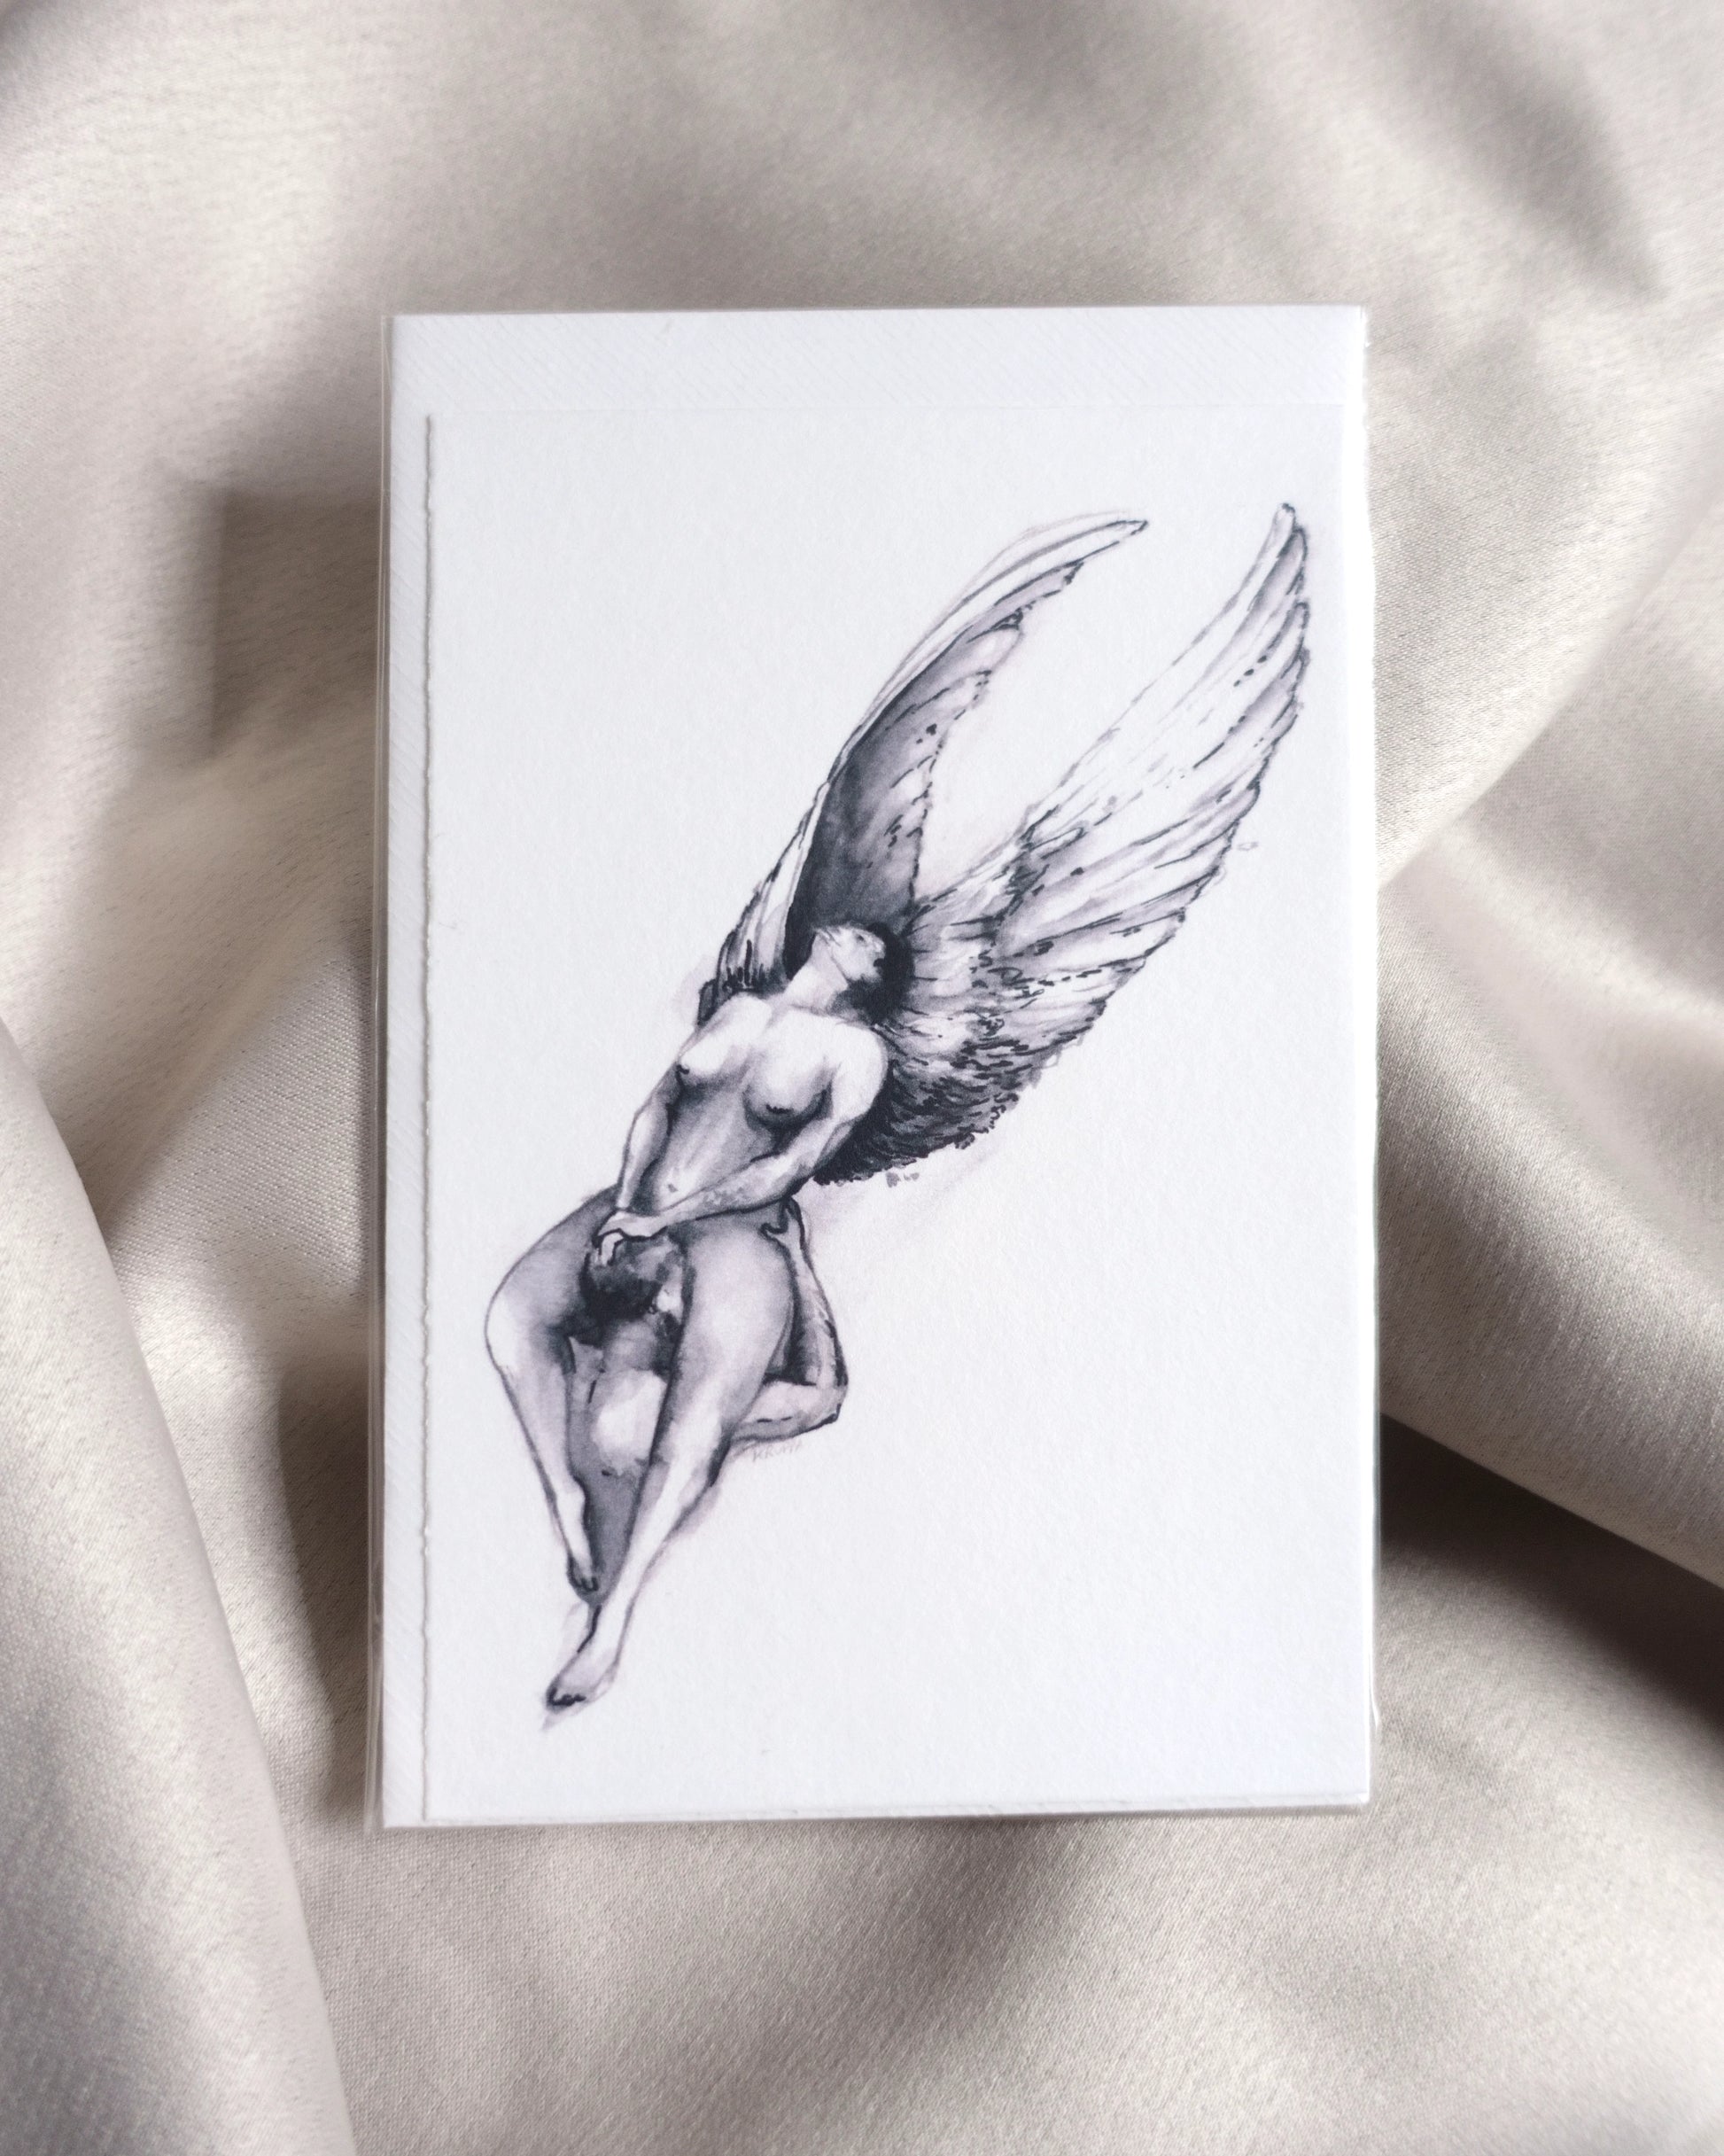 Erotic nude art greeting card "Silver Wings" by Tobias Kruppa, featuring a sensual scene of angels having oral sex / cunnilingus